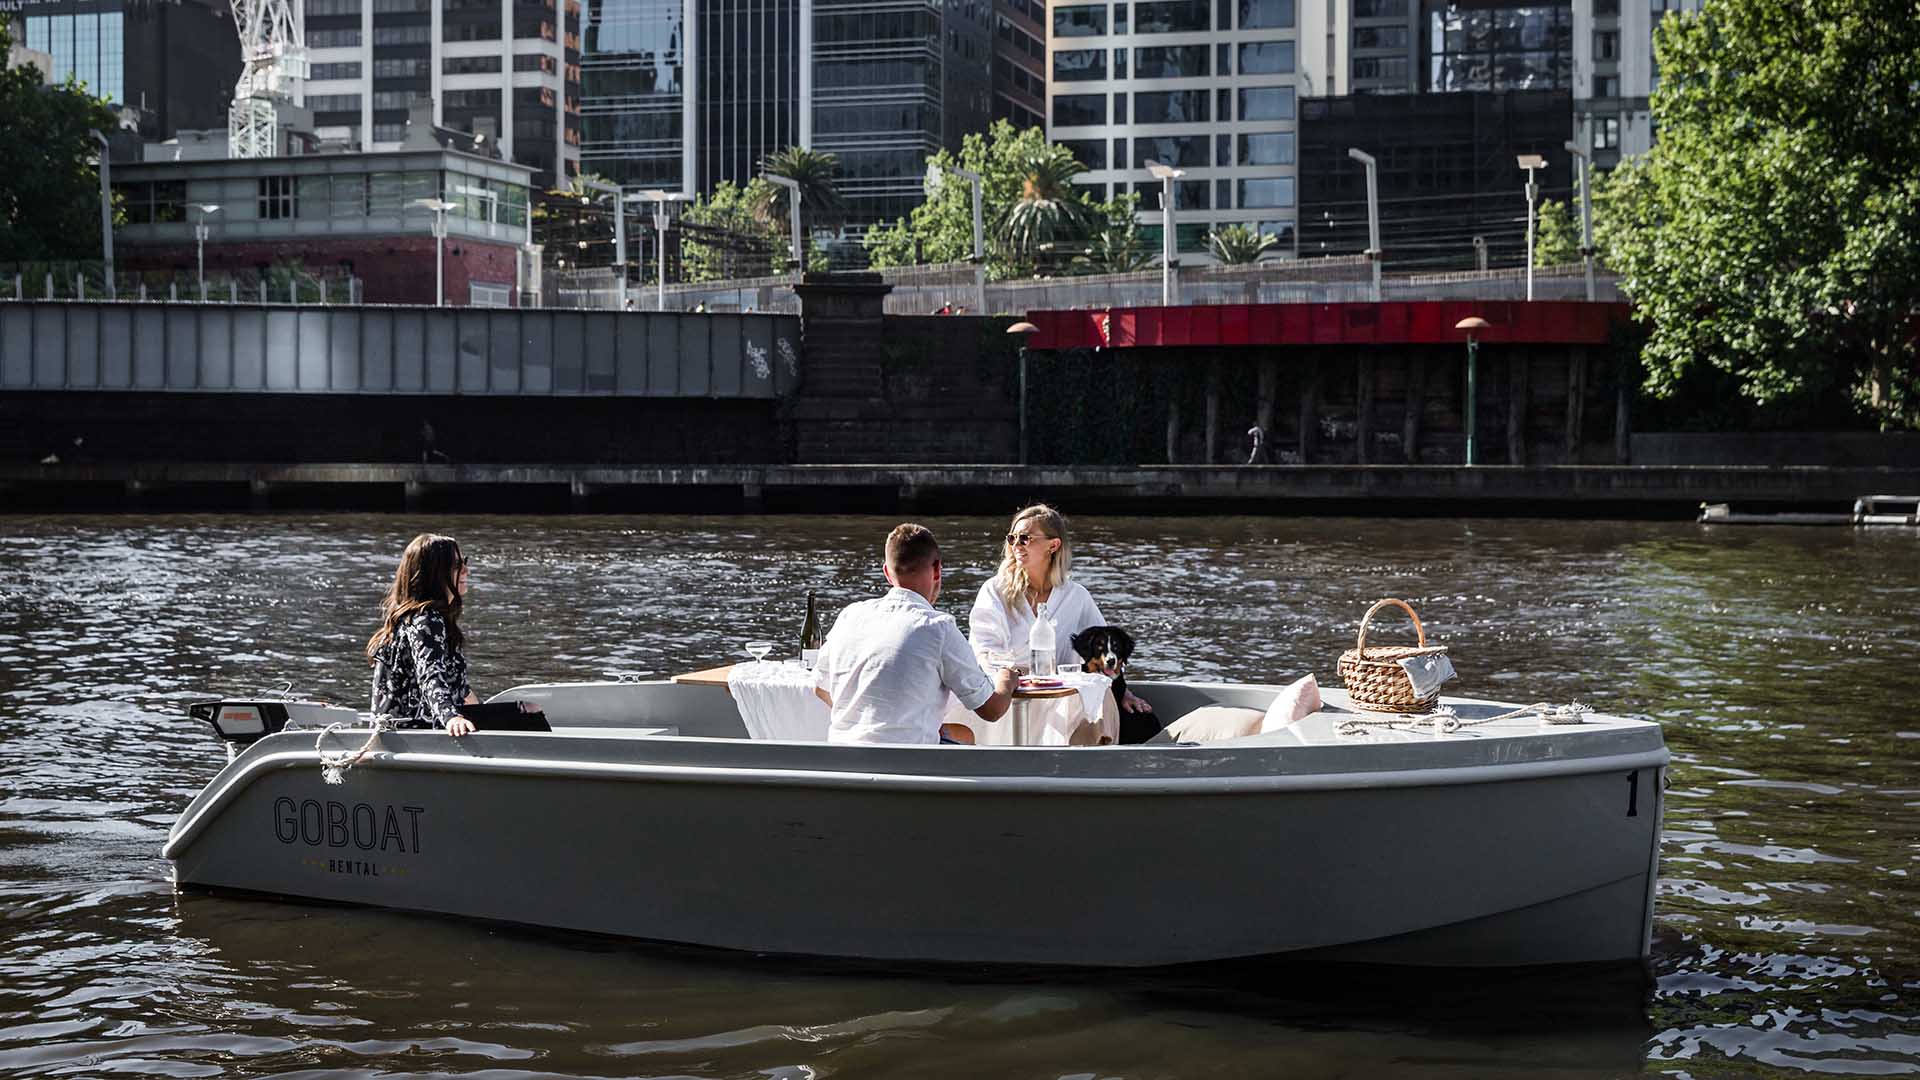 Melbourne's Pet-Friendly BYO Picnic Boats Are Returning to the Yarra Once Again